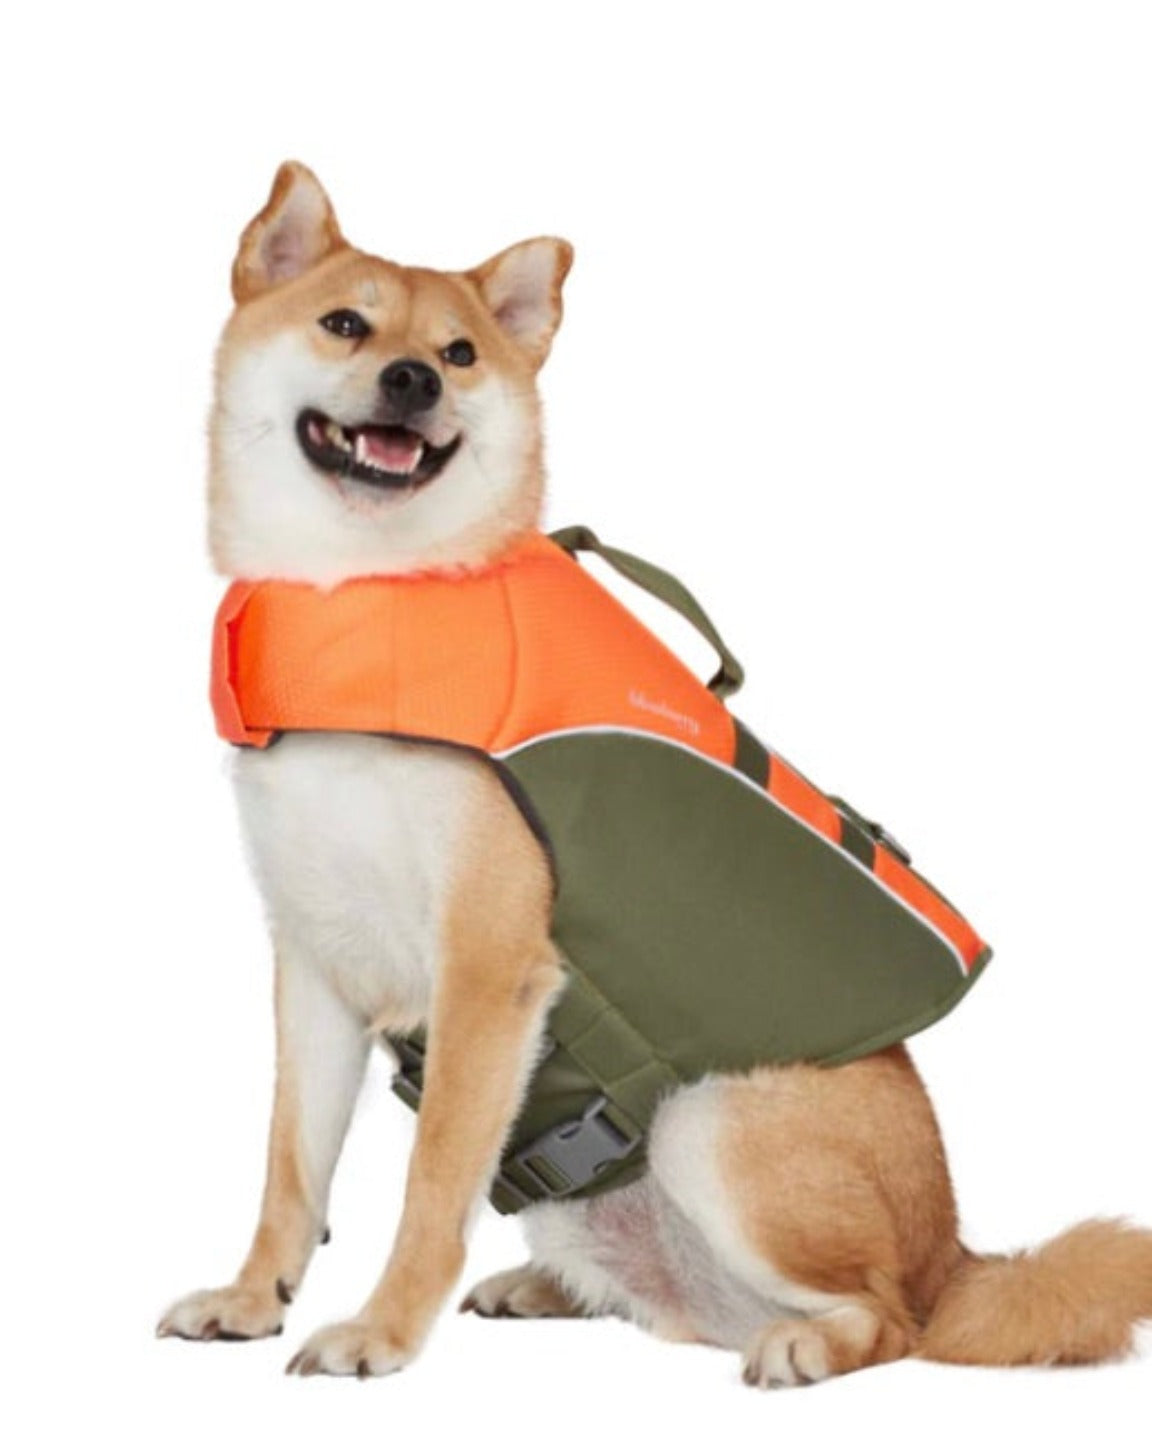 The two tone life jacket